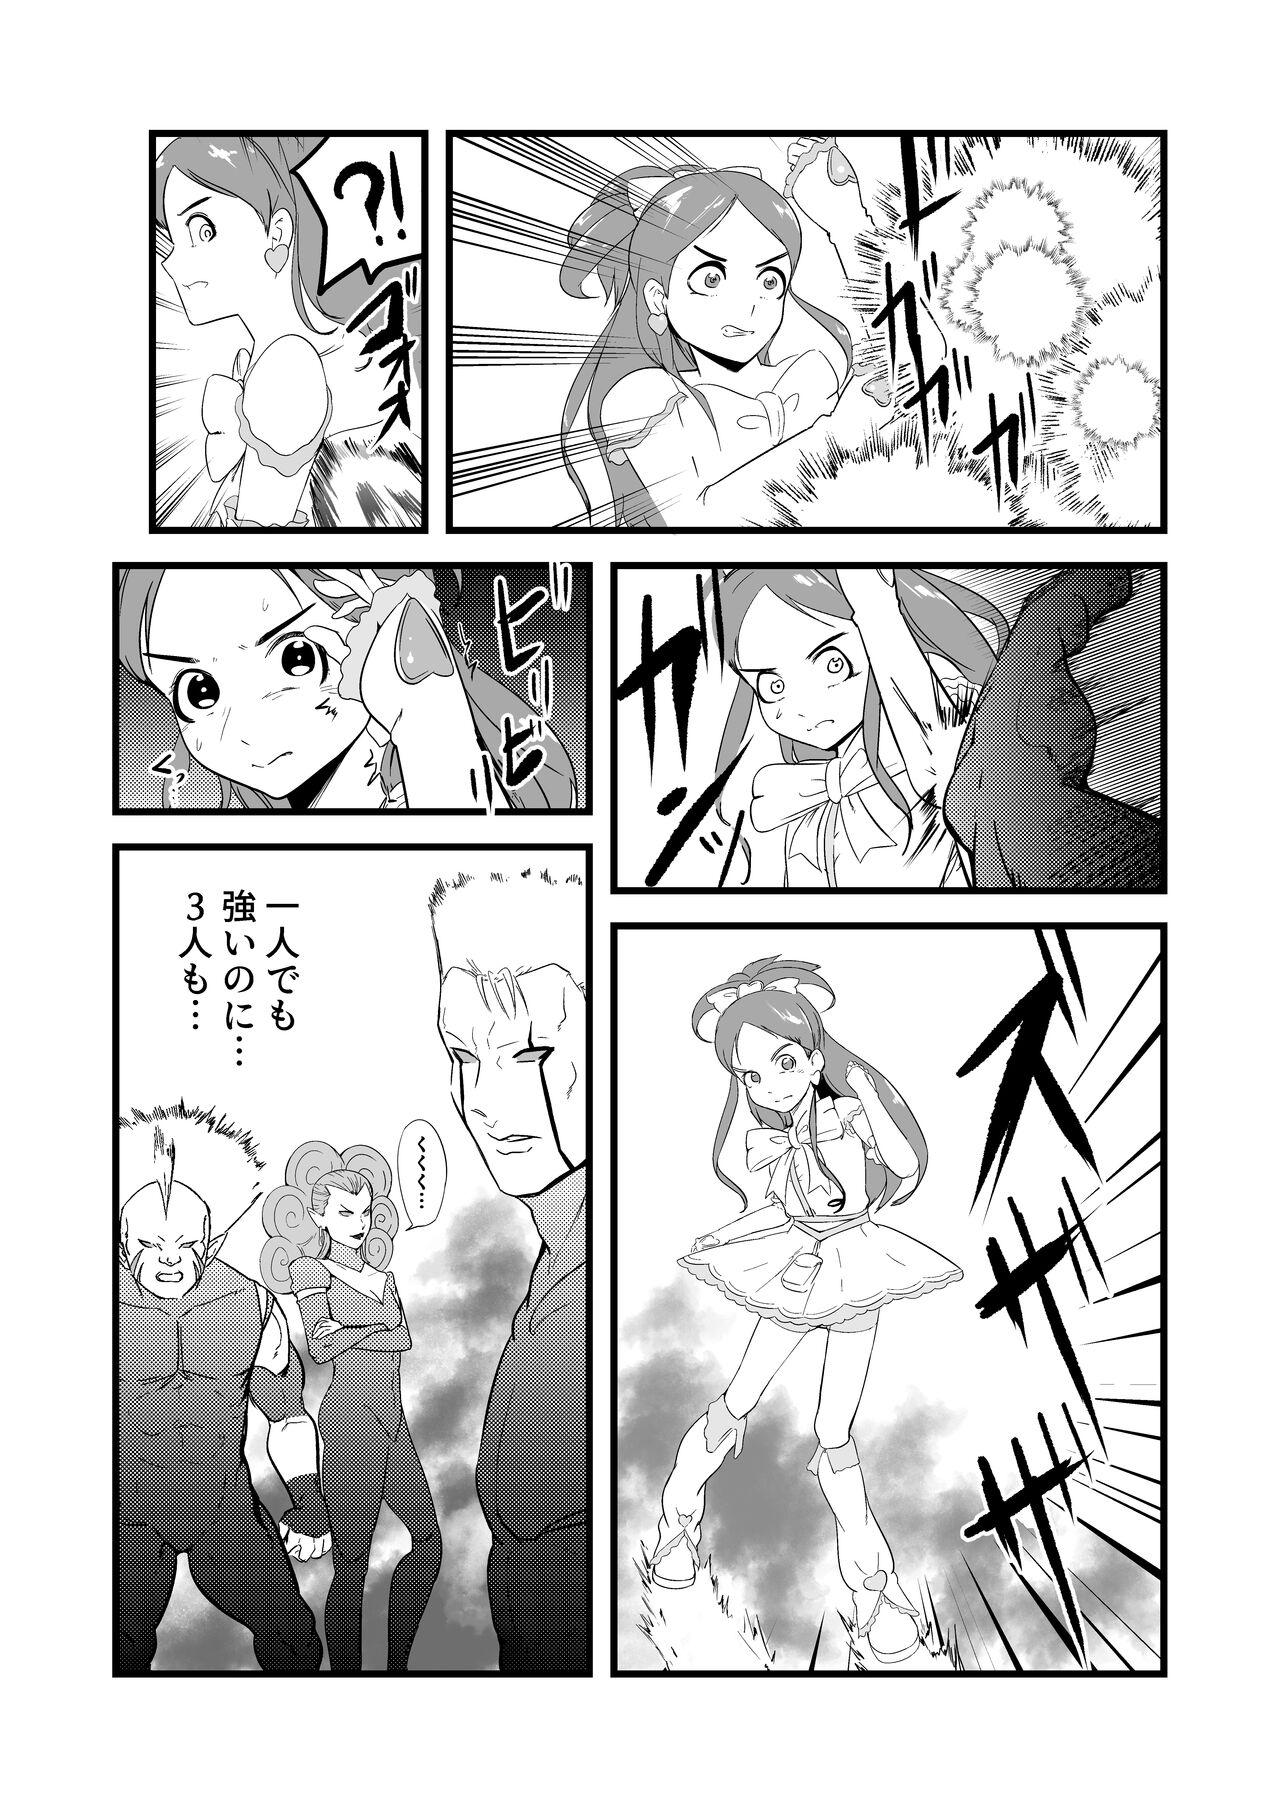 Infiel Belly Crisis 7 - Pretty cure Girls Getting Fucked - Page 9